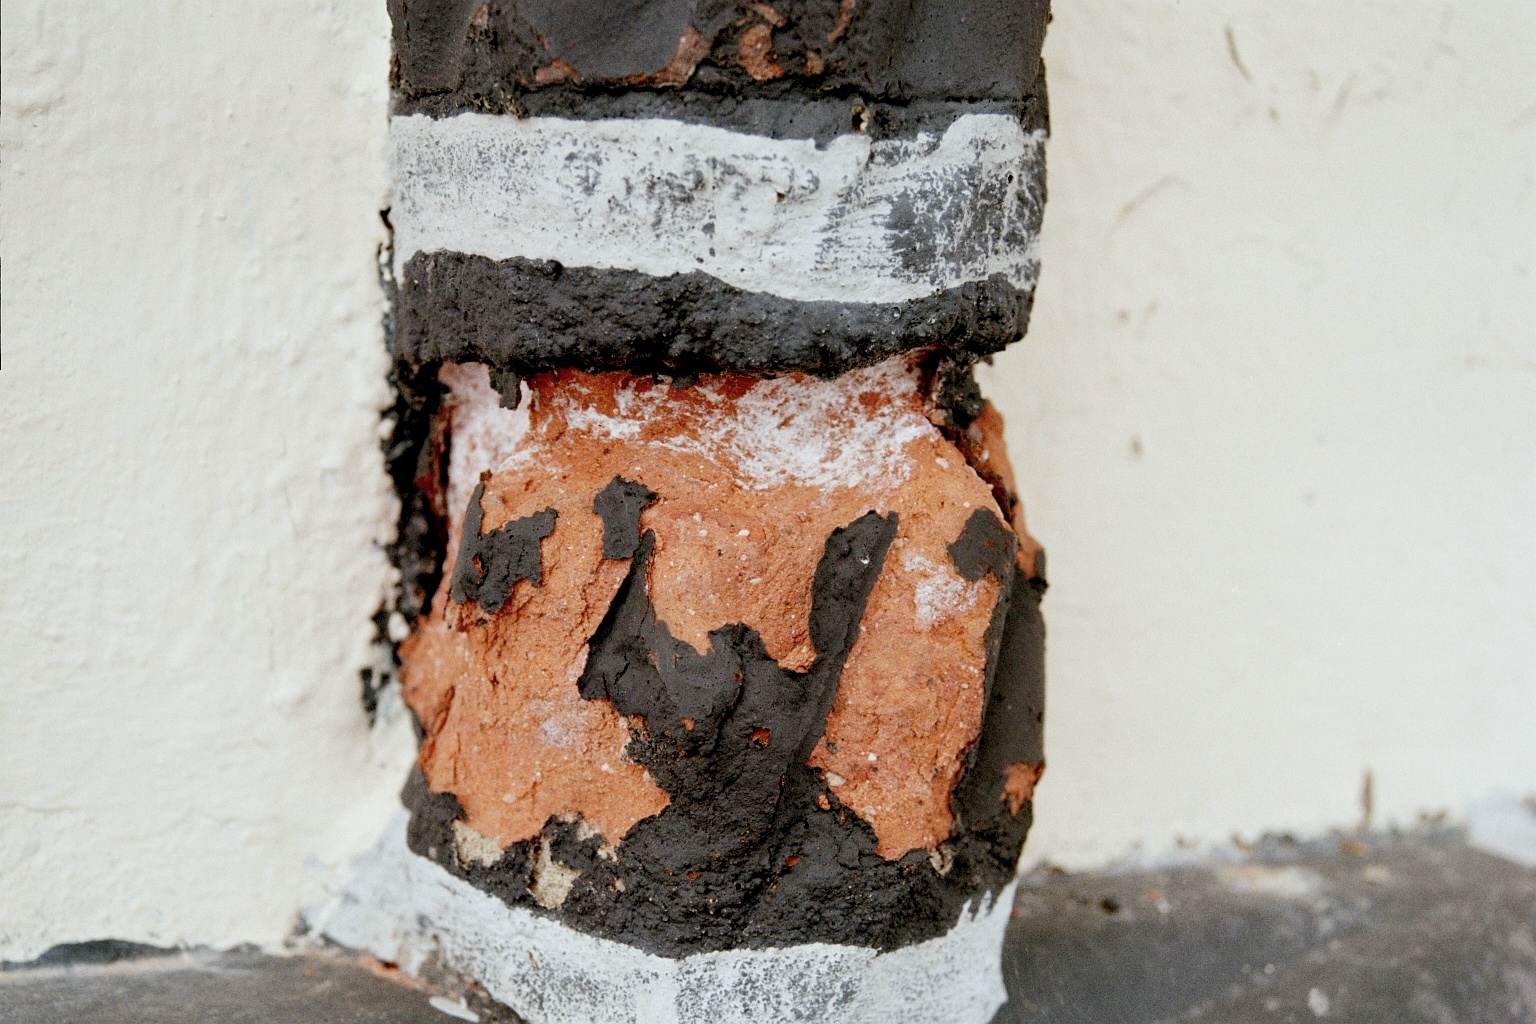 Figure 4: Salts causing damage to a molded brick